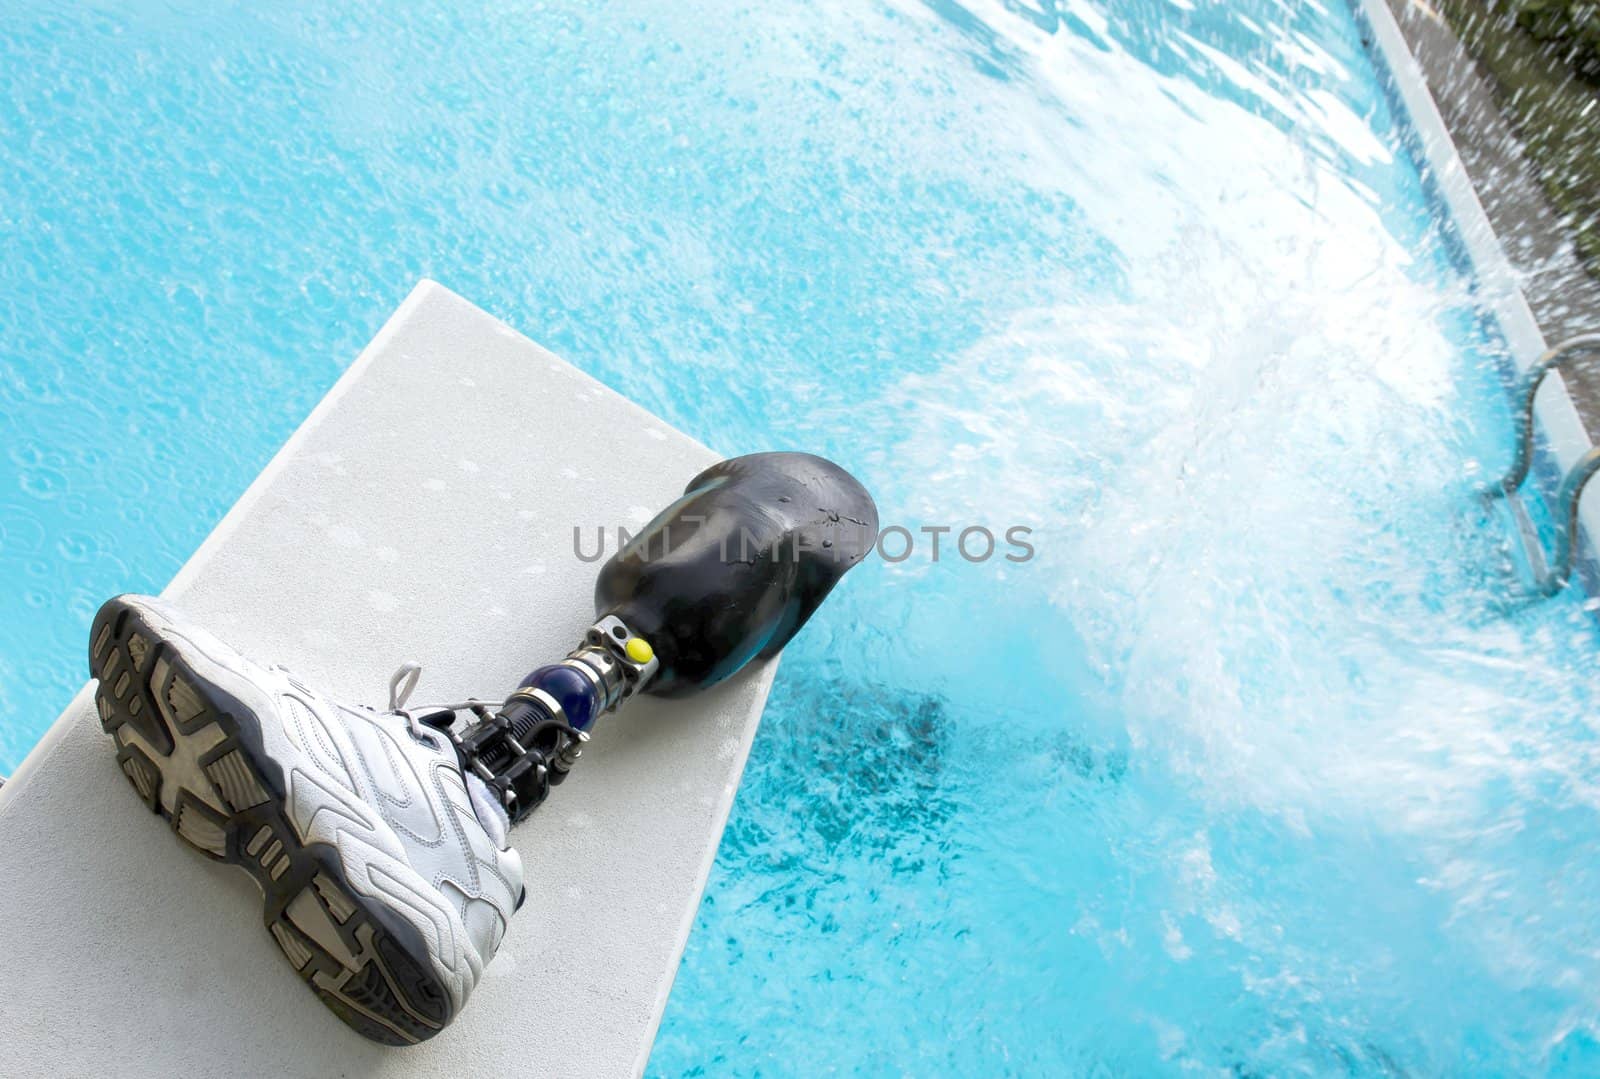 Cannonball splash in a pool with prosthetic leg left on diving board.